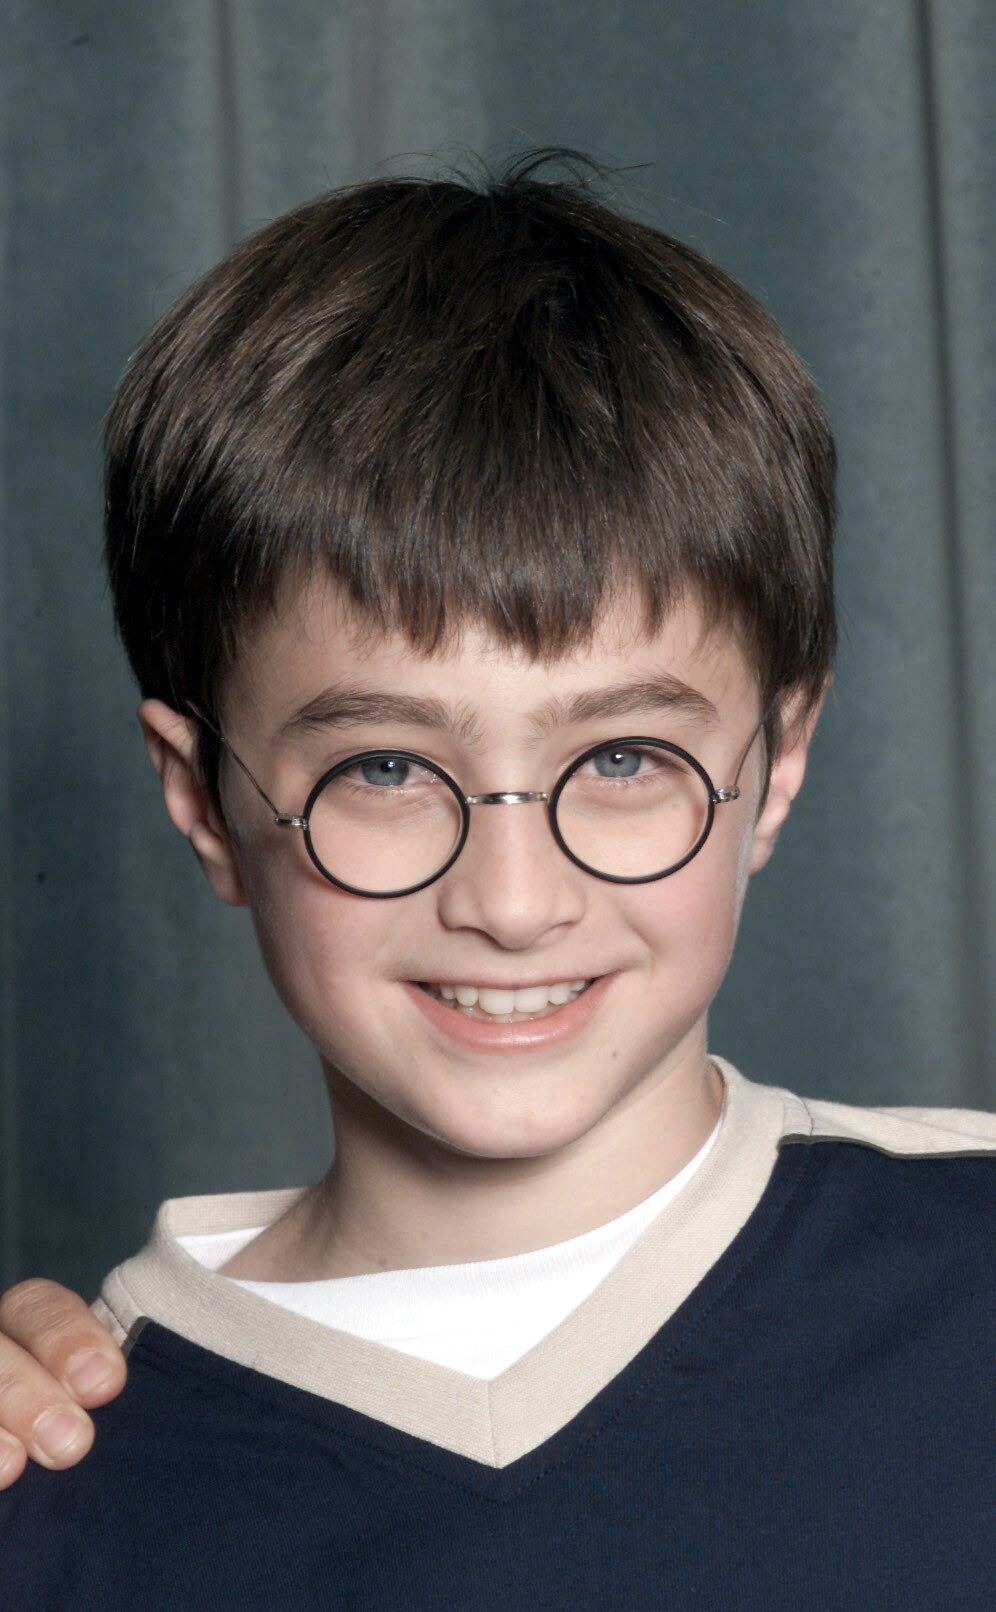 Actor Daniel Radcliffe attends a press conference for the movie &quot;Harry Potter and The Philosopher&#x27;s Stone&quot; in London on August 23, 2000. 11 year old Daniel will play Harry Potter in the film of the popular book by JK Rowling